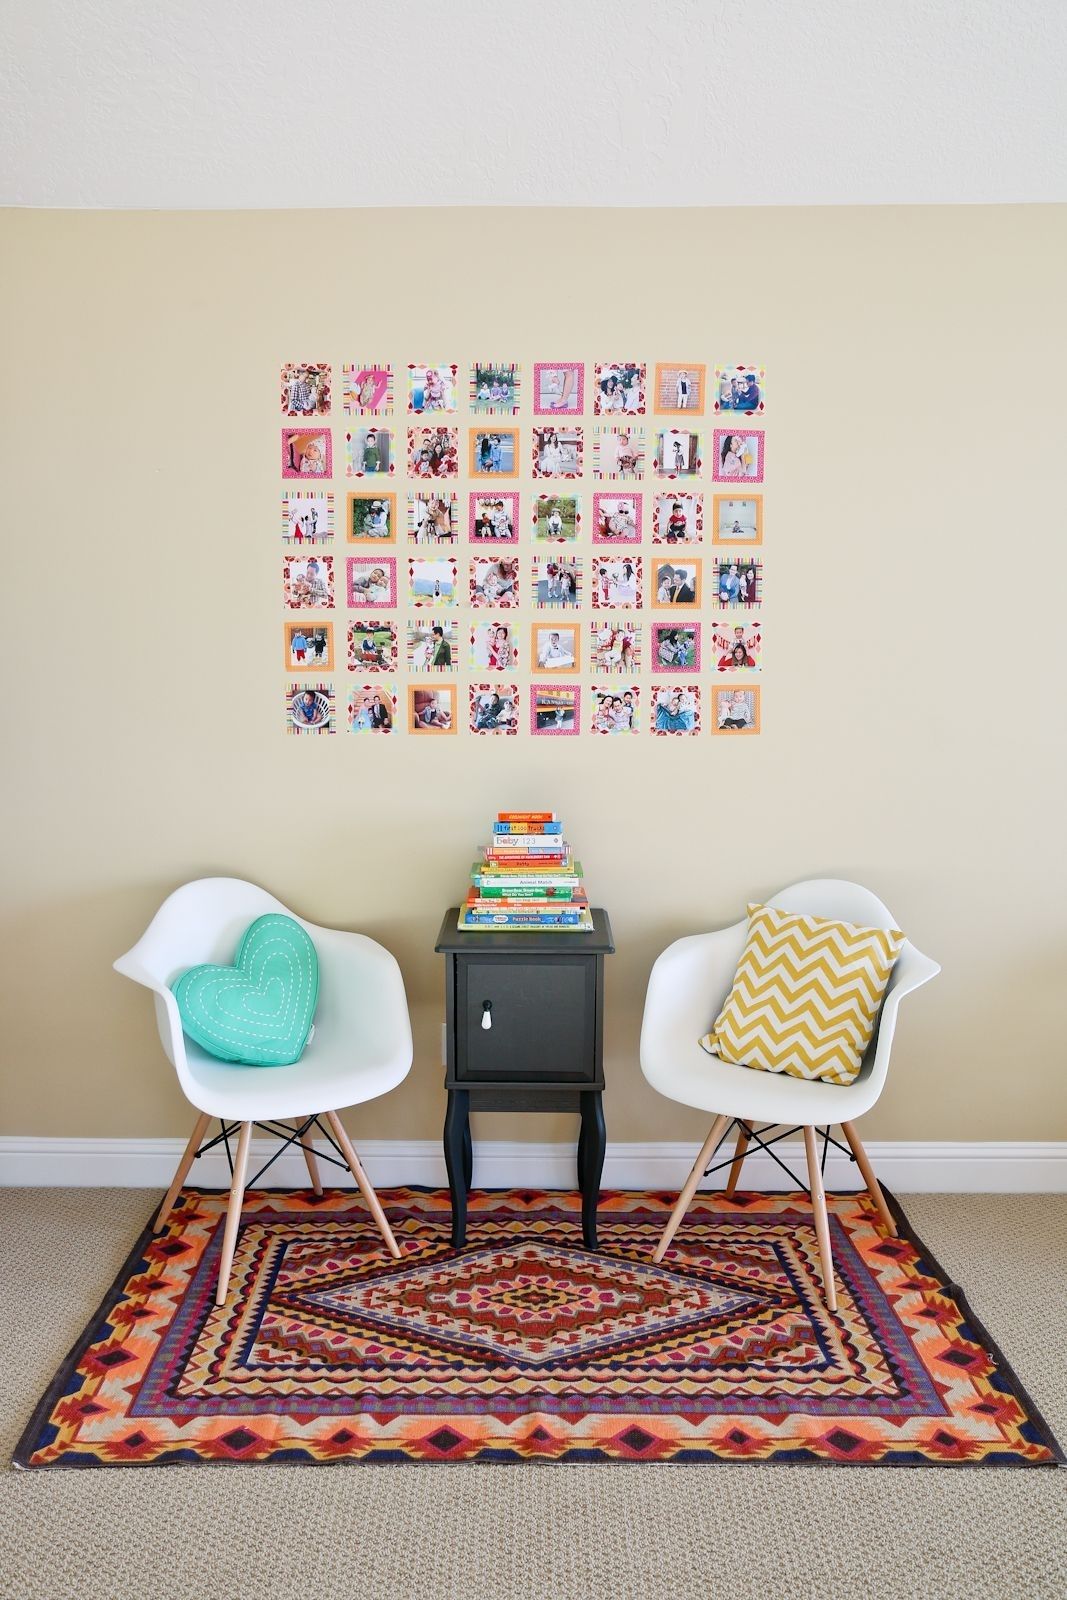 Instagram Wall Art With Washi Tape | Diy Home Projects | Pinterest In Washi Tape Wall Art (View 1 of 20)